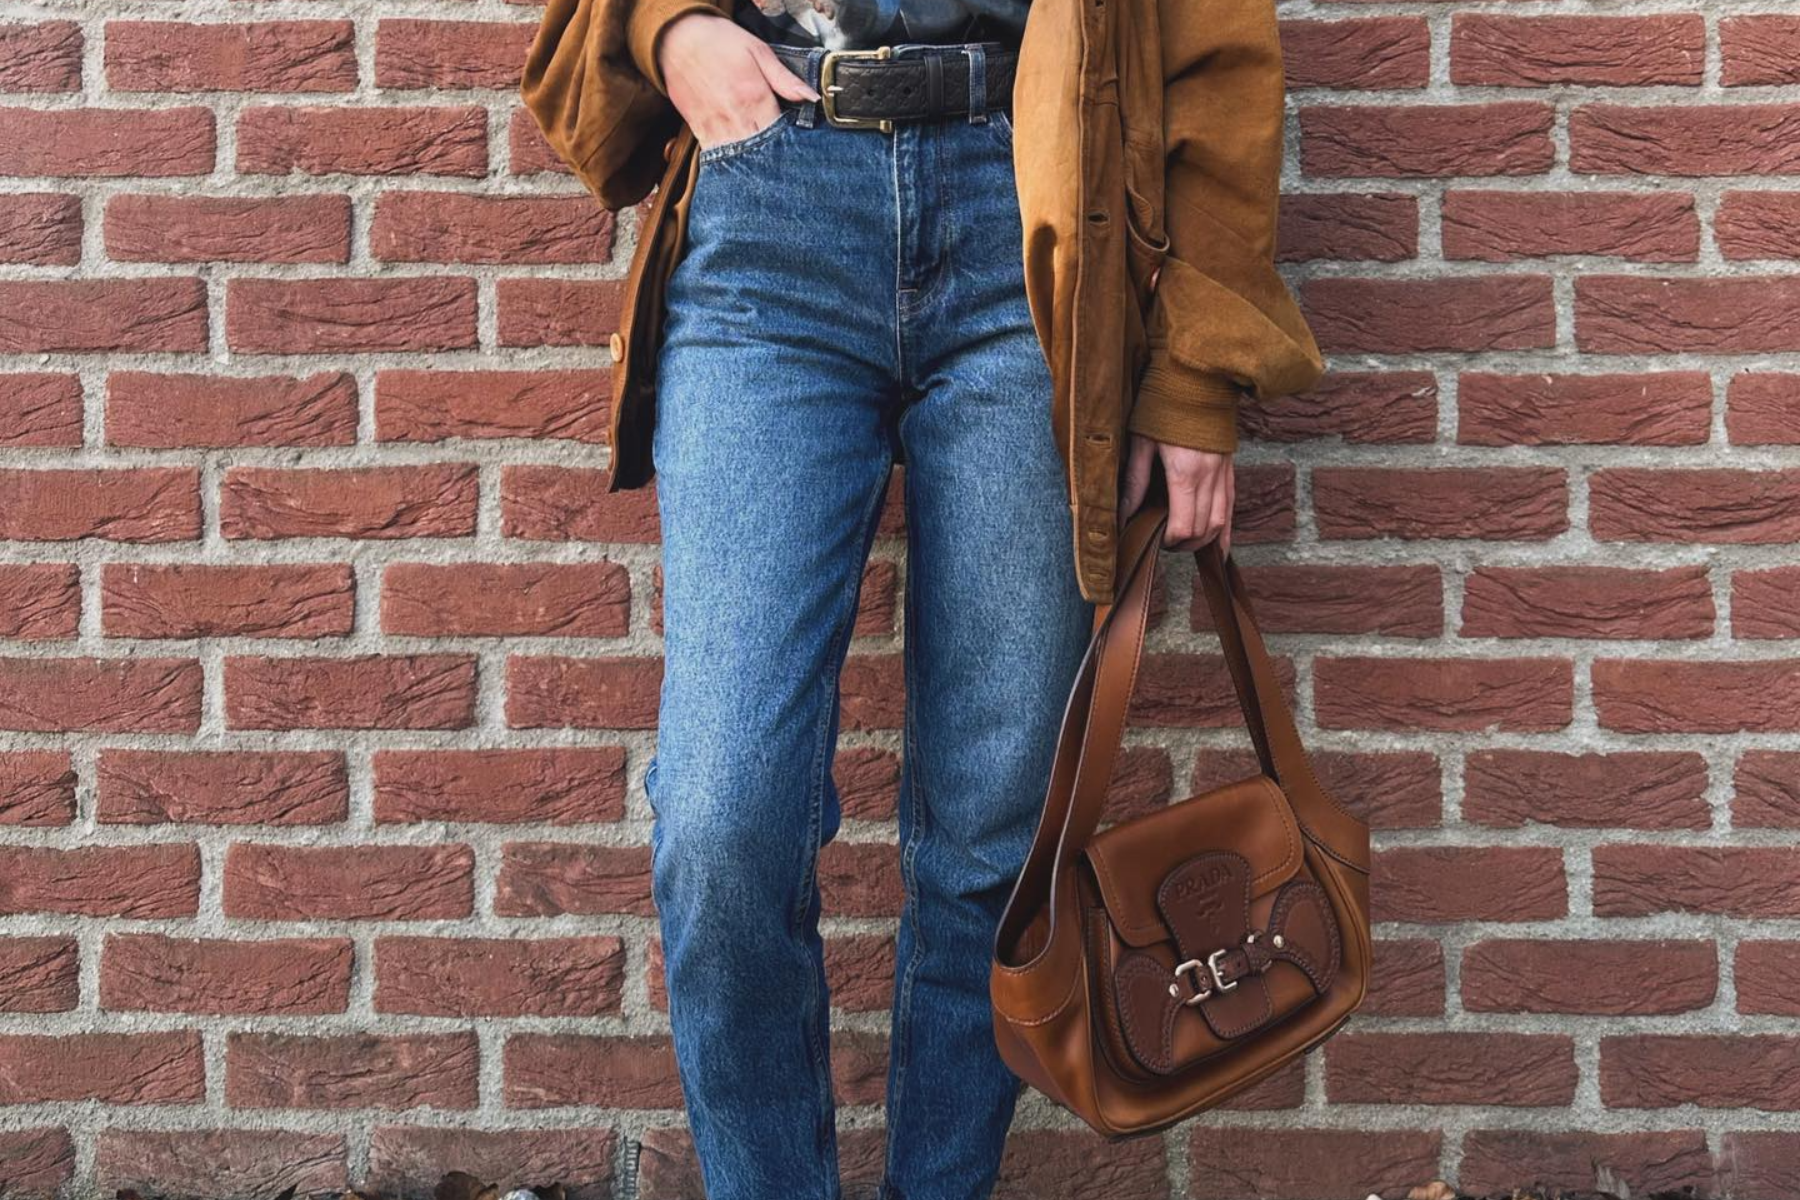 A person is rocking a blue jeans with a brown jacket and bag